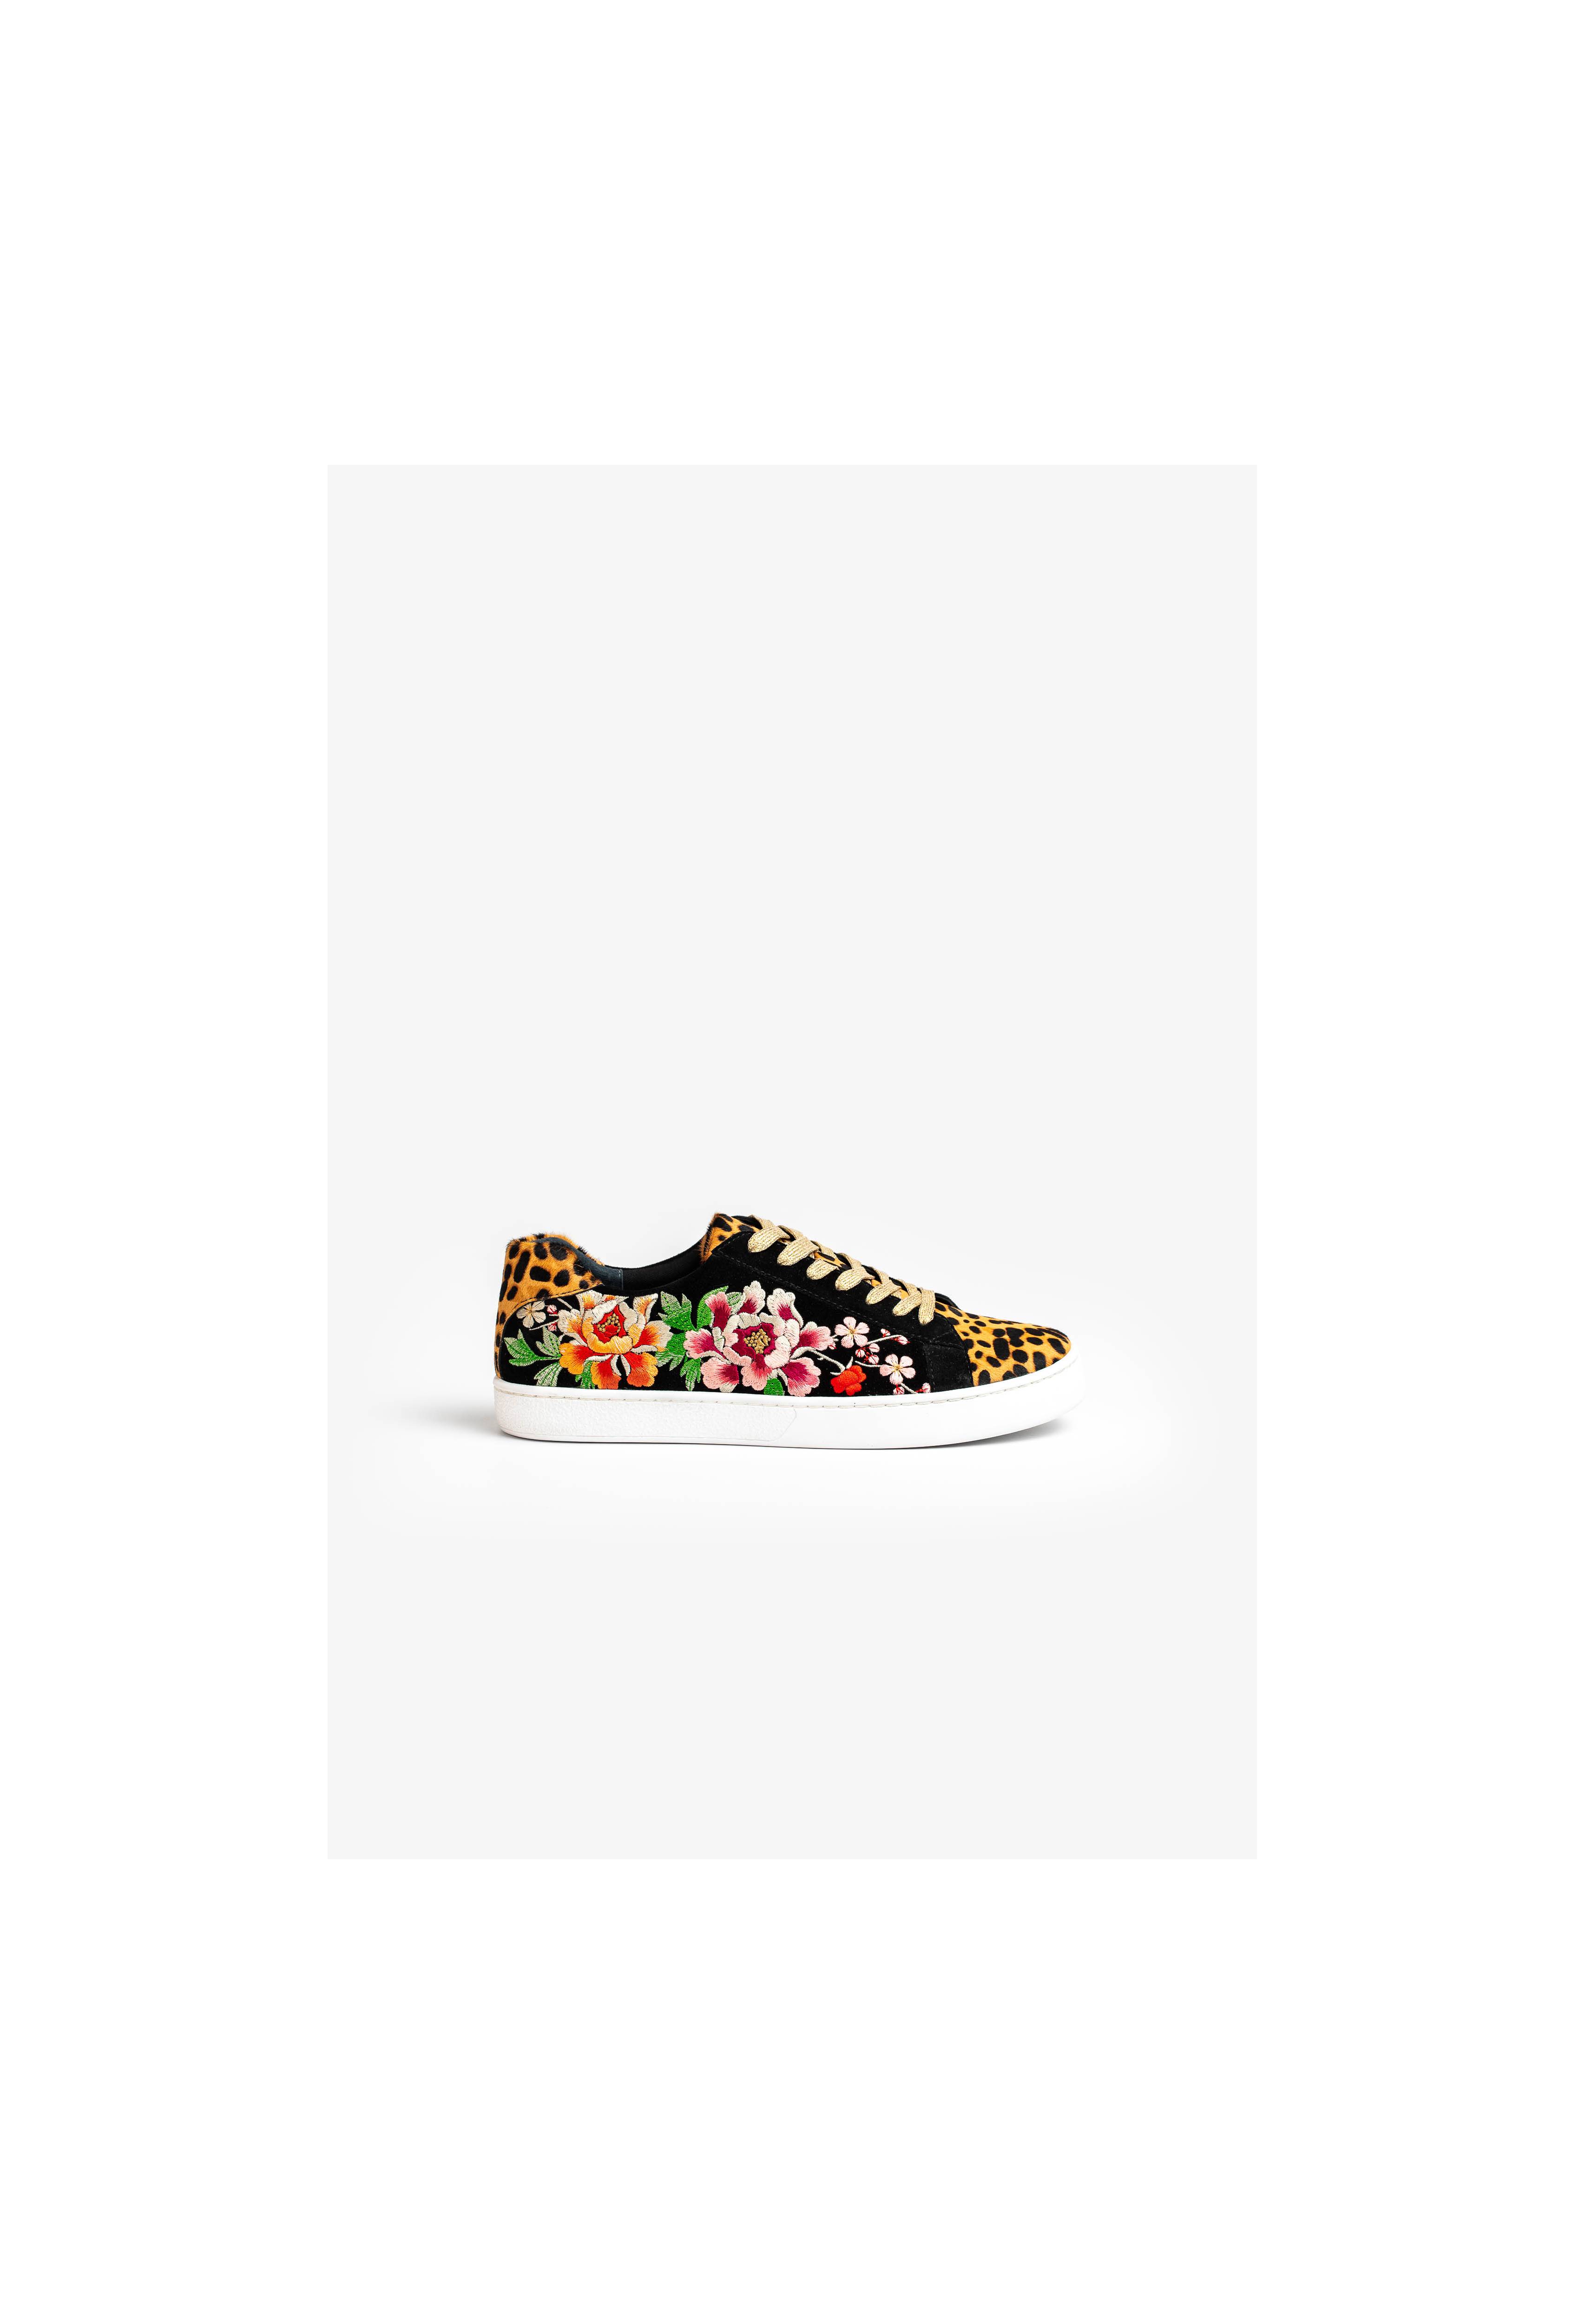 Acacia Leopard Sneaker, , large image number 1